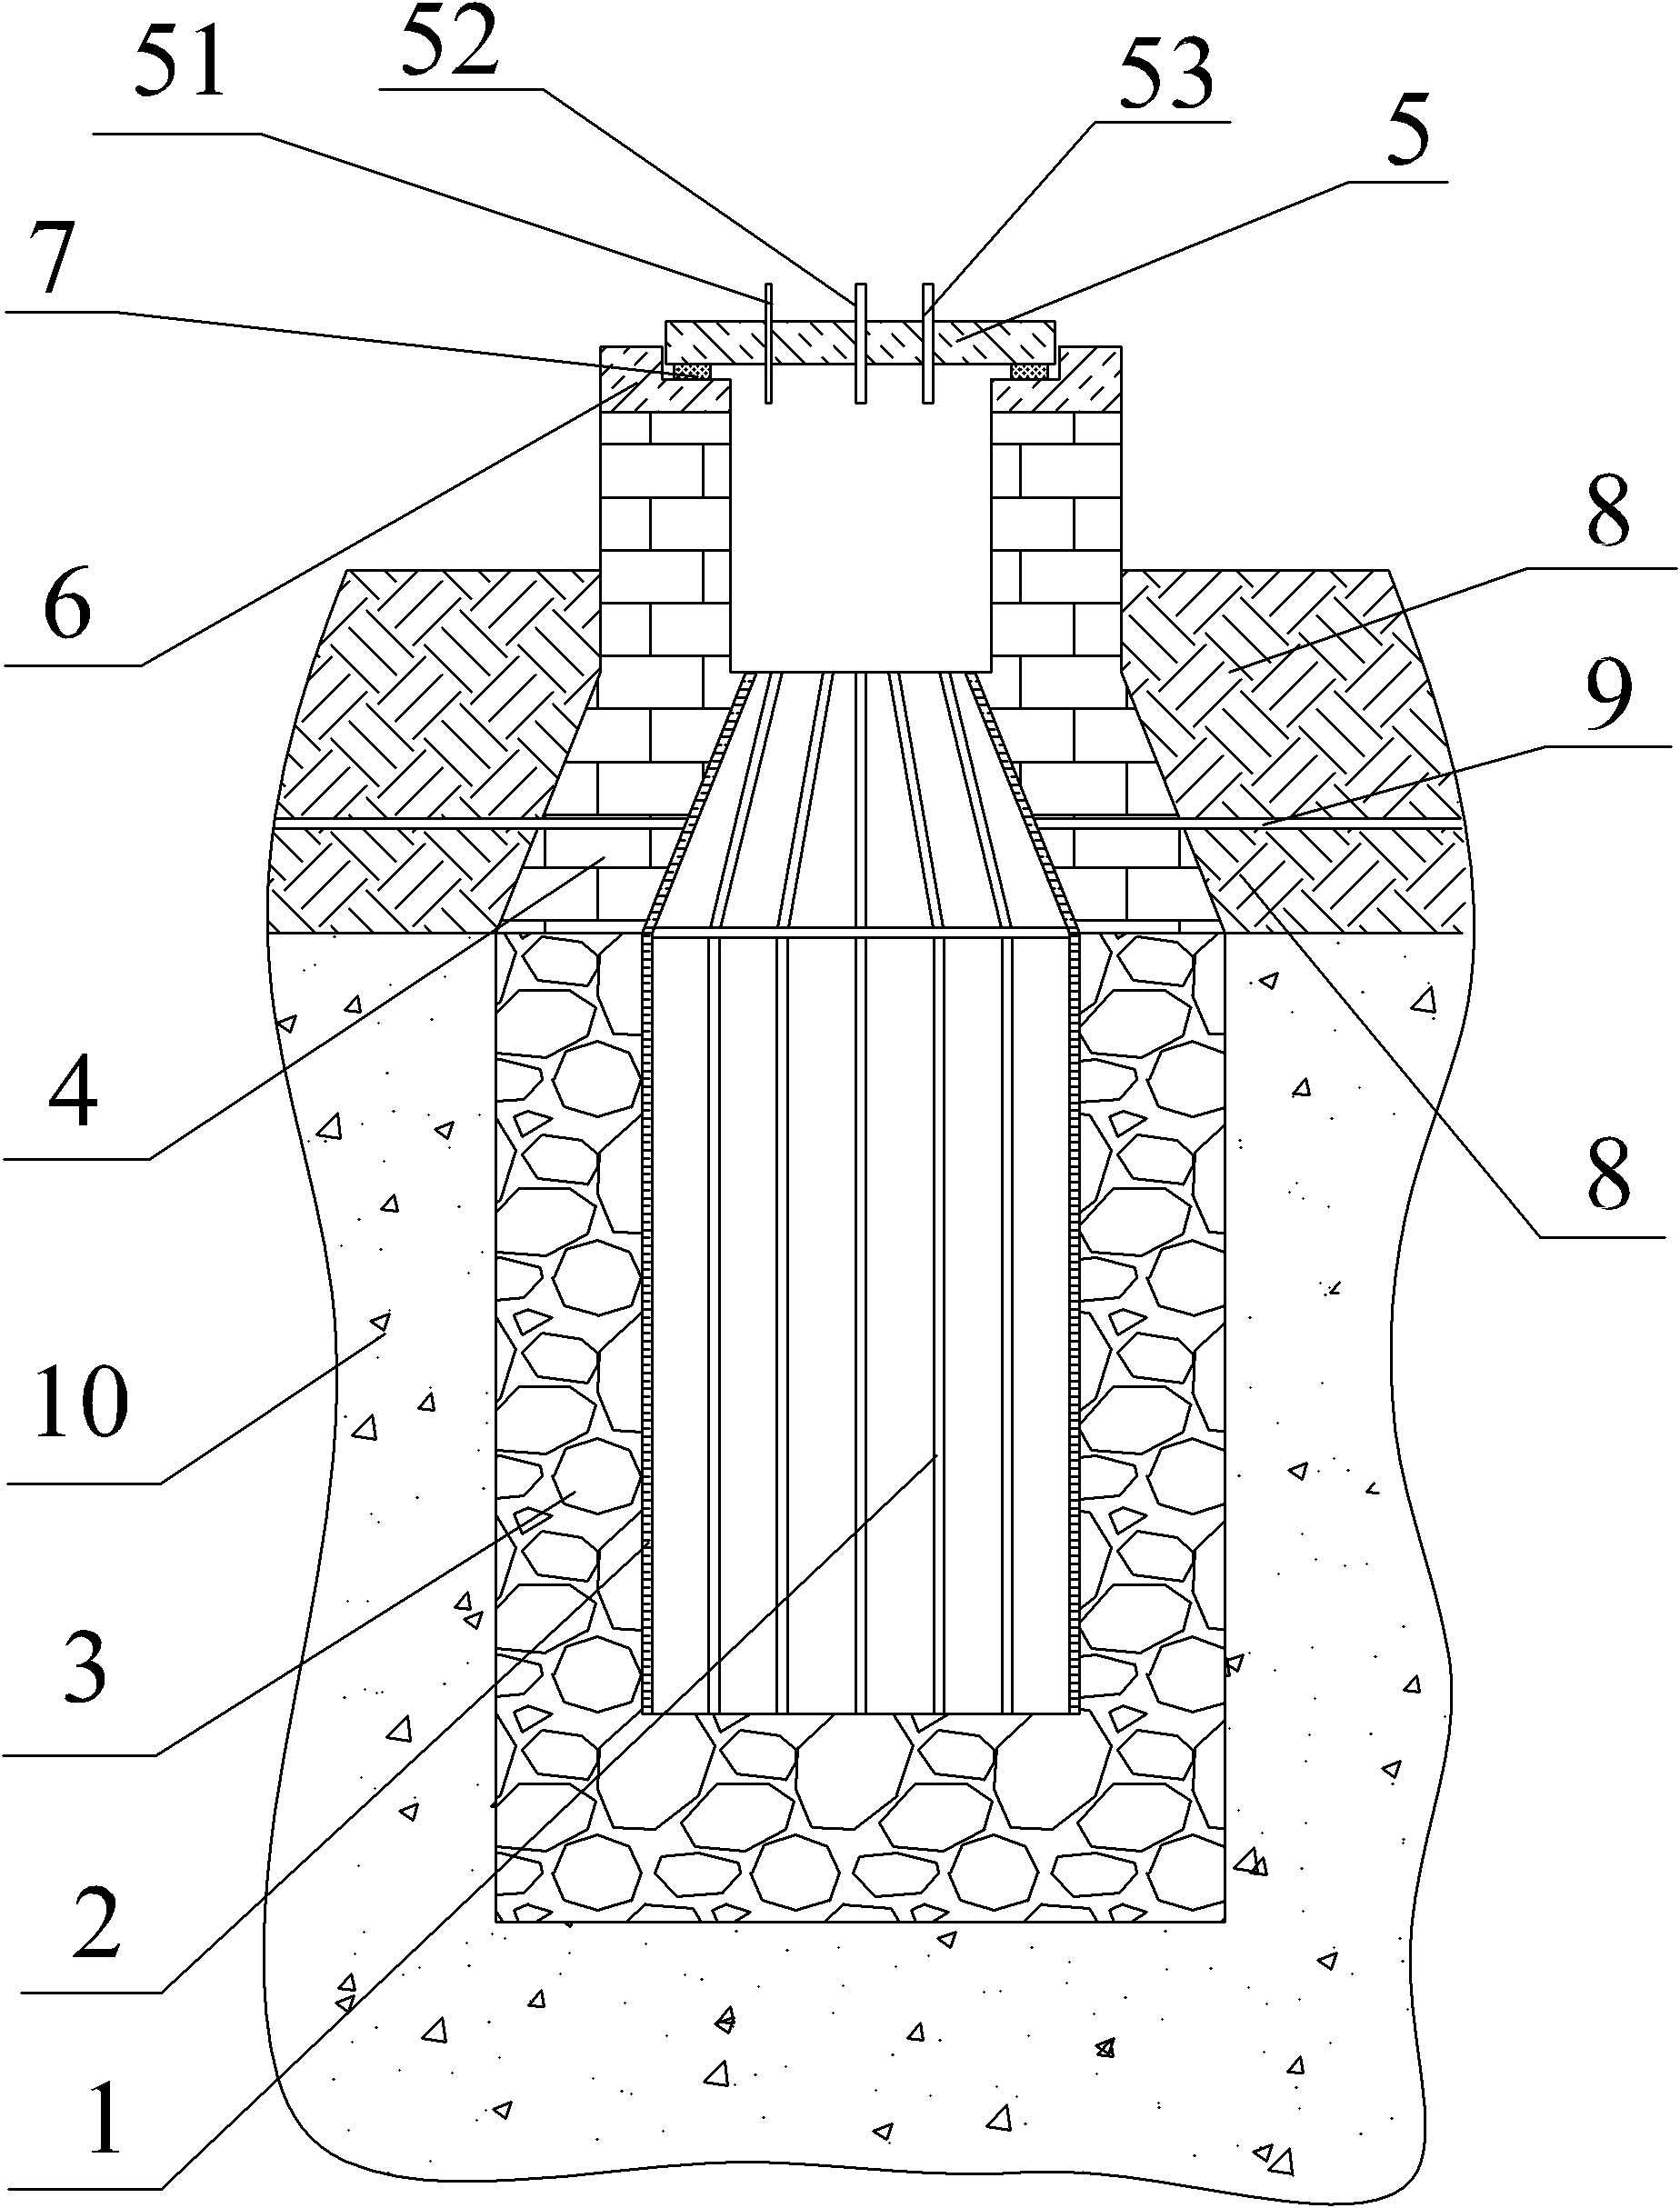 Large-sized material storage yard gas guide and discharge well and well cementing construction method